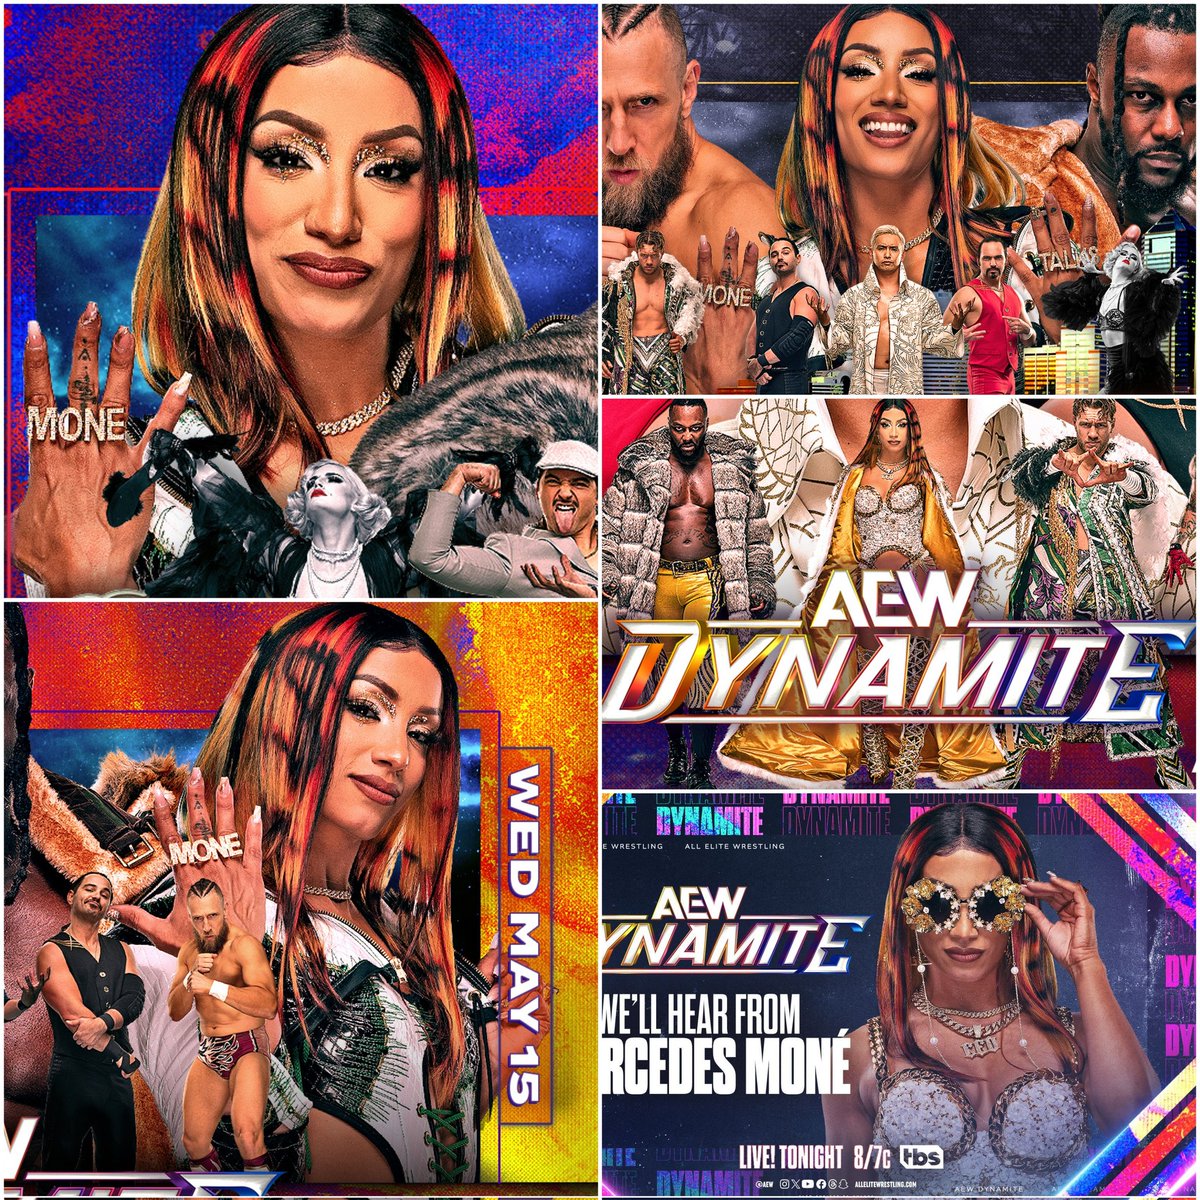 AEW taking a different render for each poster, Mercedes is featured on>>>
#FaceoftheCompany

#MercedesMoné #MercedesVarnado  #TheCeo #AllMonéWrestling